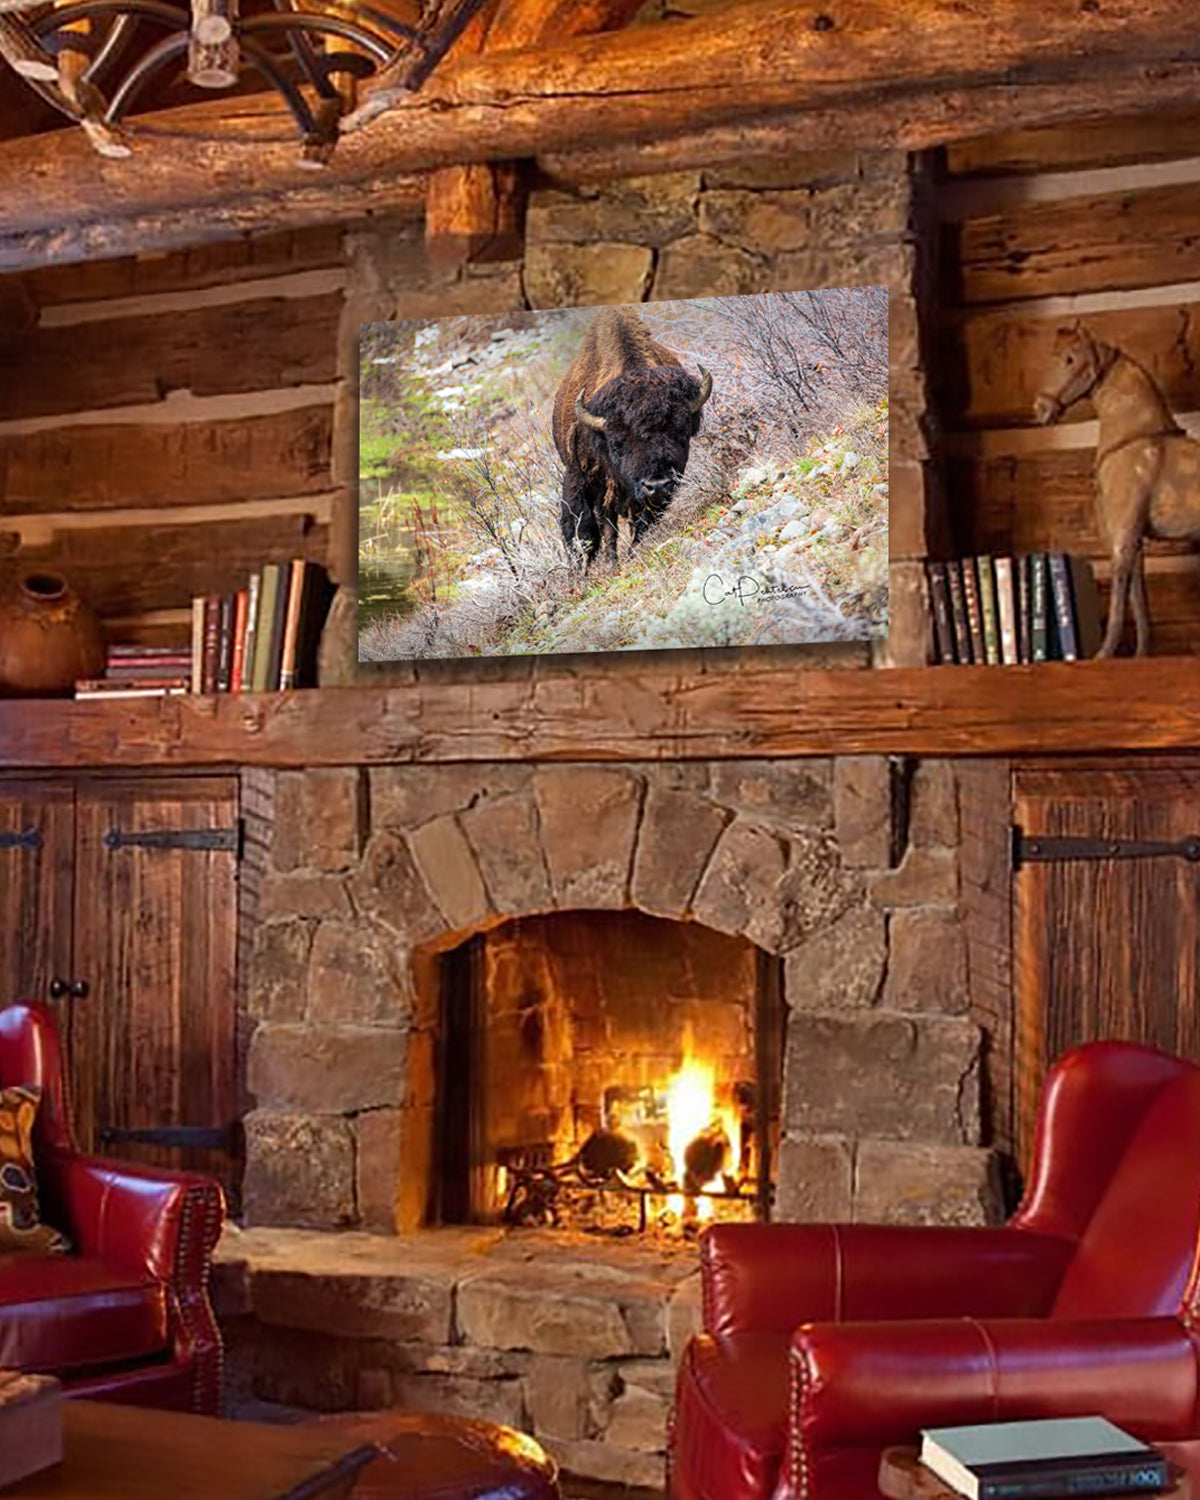 Wild bull buffalo bison coming out of the Marsh over stone fireplace mantel in log home